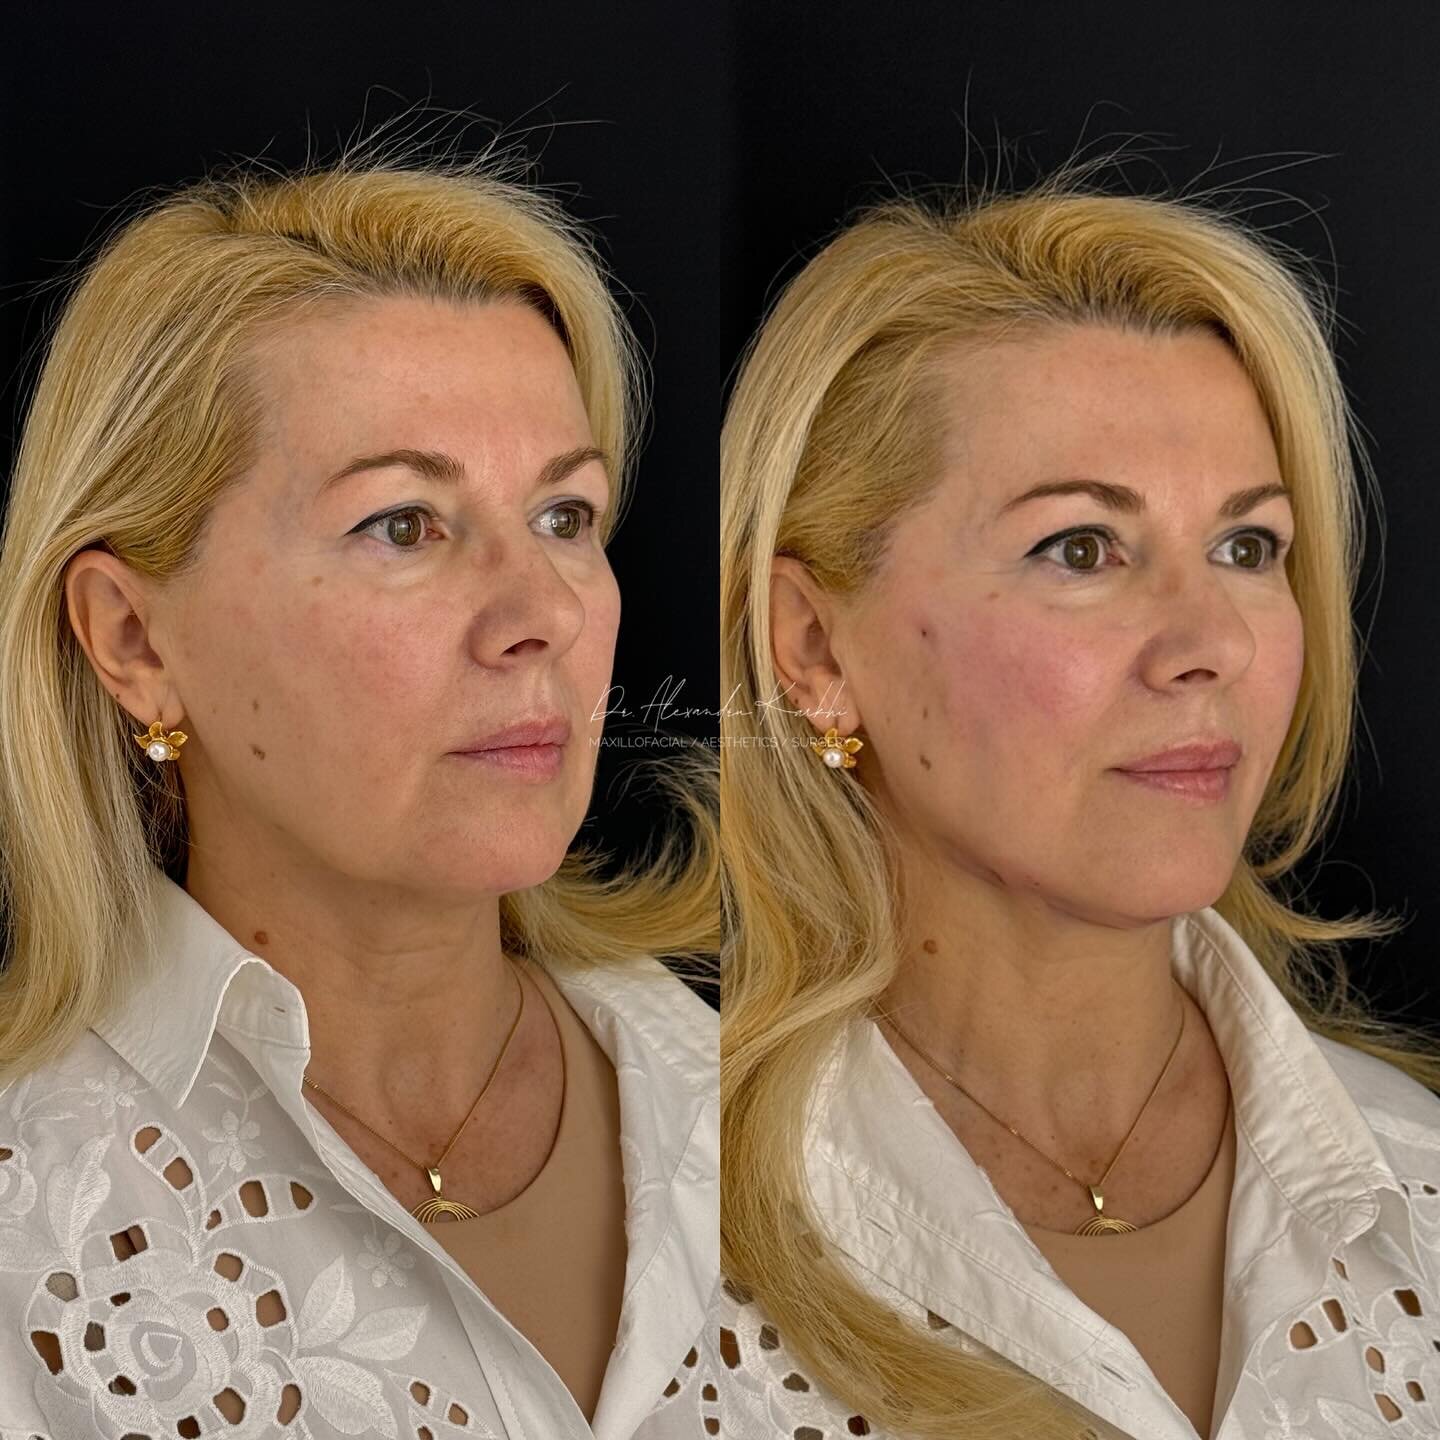 Liftingul feței și al g&acirc;tului cu fire resorbabile DR.K 🪡 
.
Face and neck lifting with DR.K threads 🪡
.
#drk #threads #threadlift #itworks #facelift #nonsurgical #lift